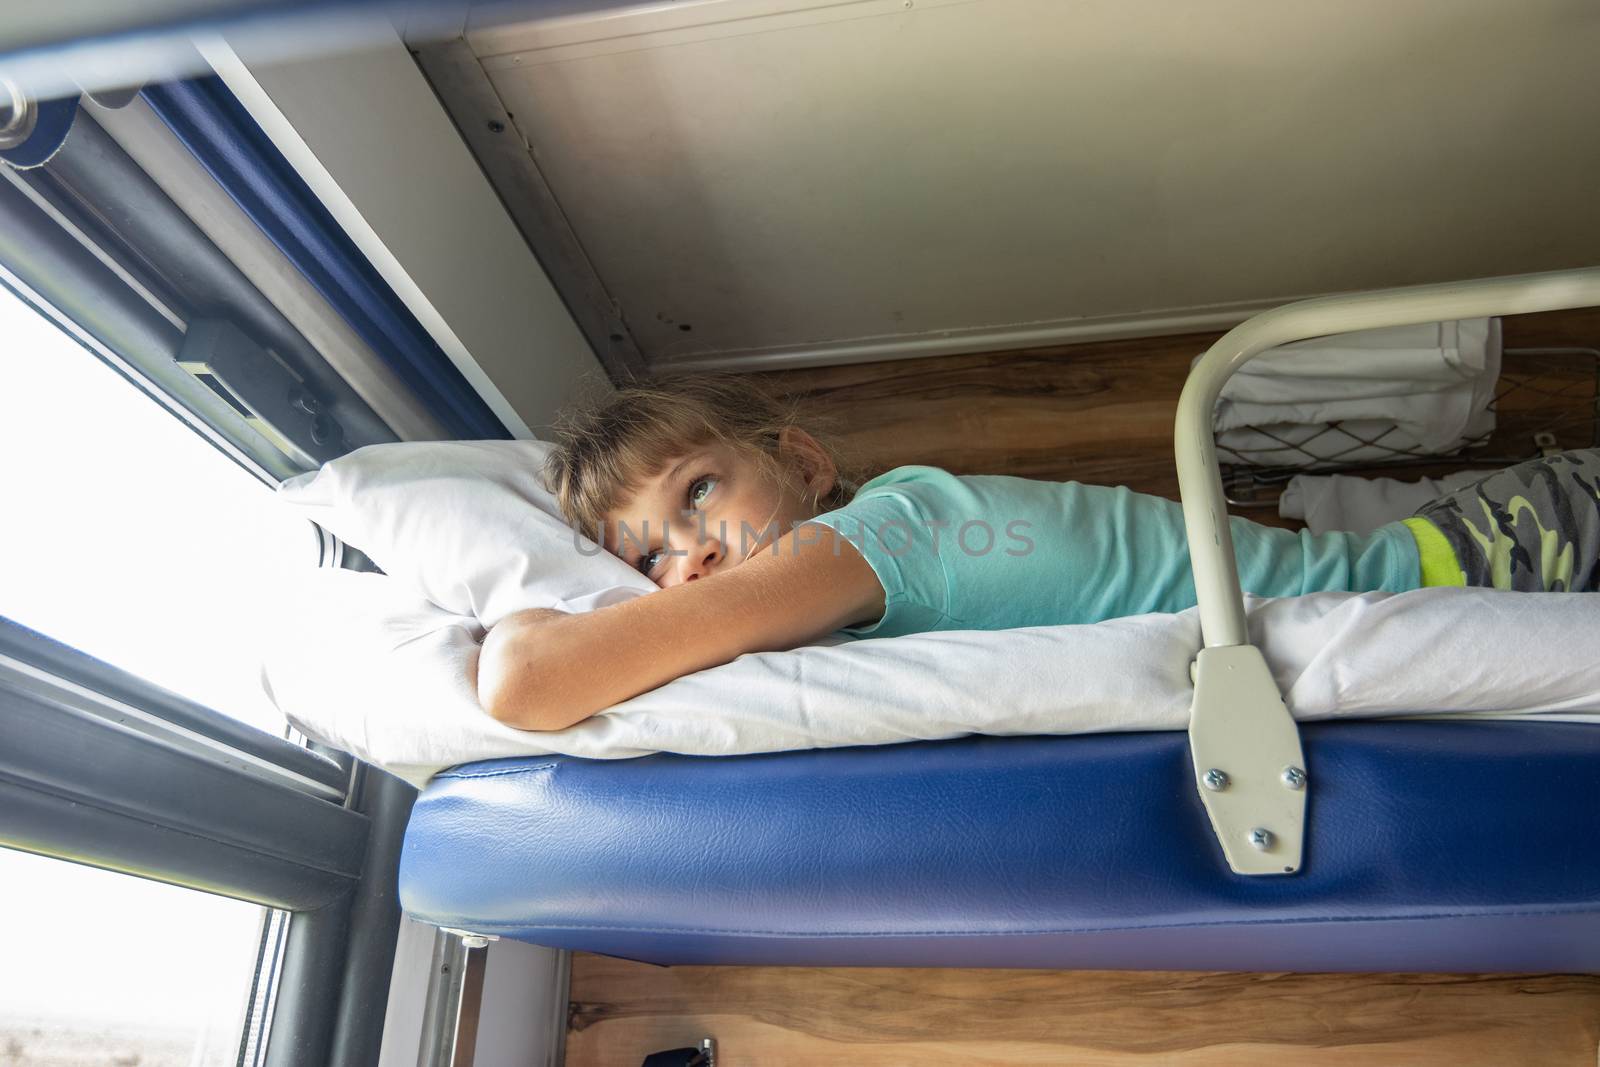 An eight-year-old girl lies on the top shelf of a reserved seat car and looks tiredly out the window